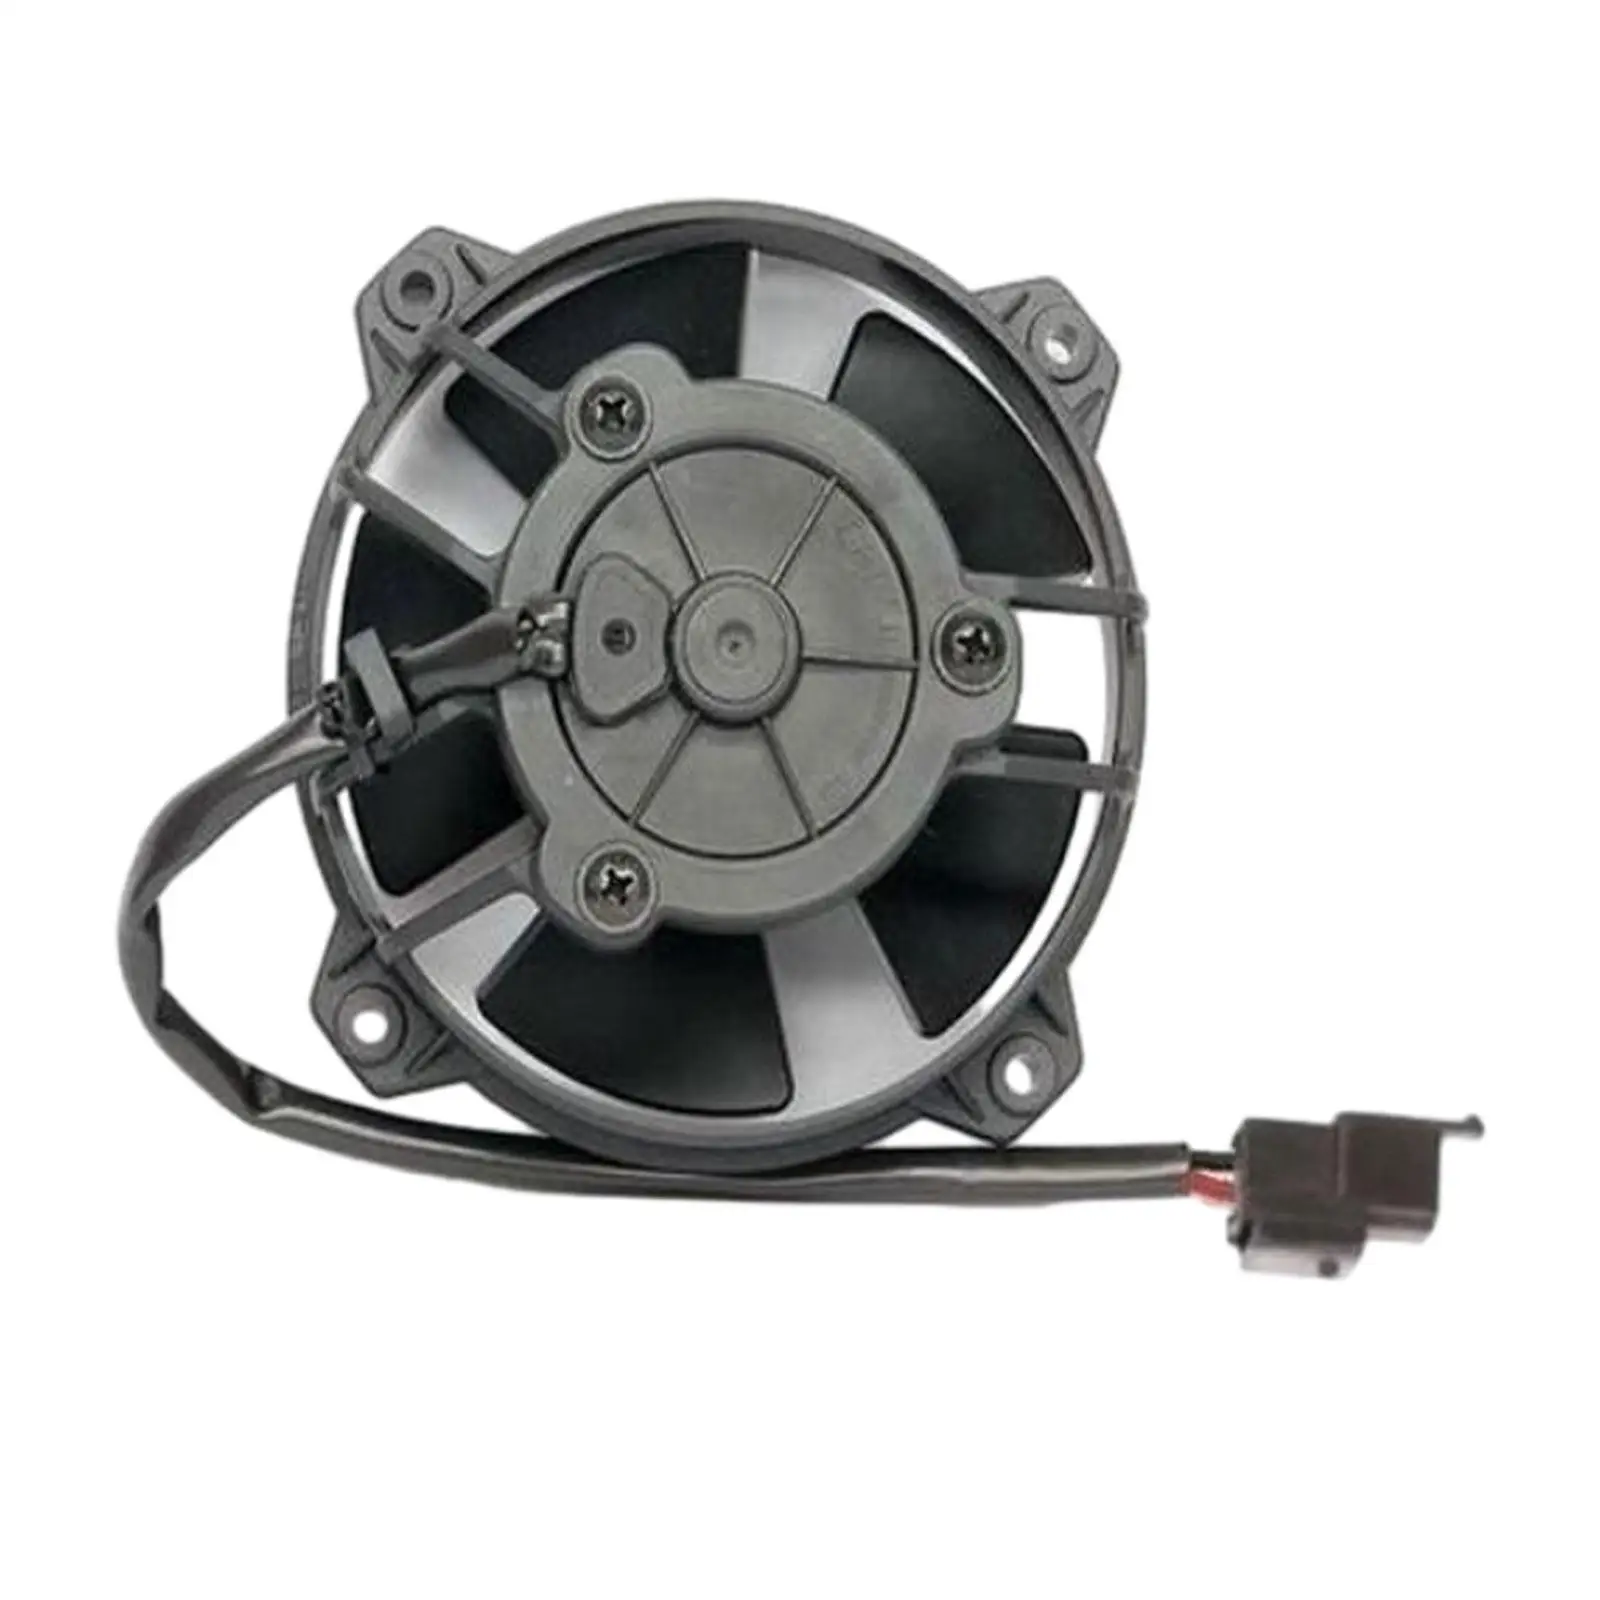 Paddle Blade Puller Fan 4 inch 12 V Puller Cooling Fan Long Service Life Assembly Automotive Accessories Easily Install Premium